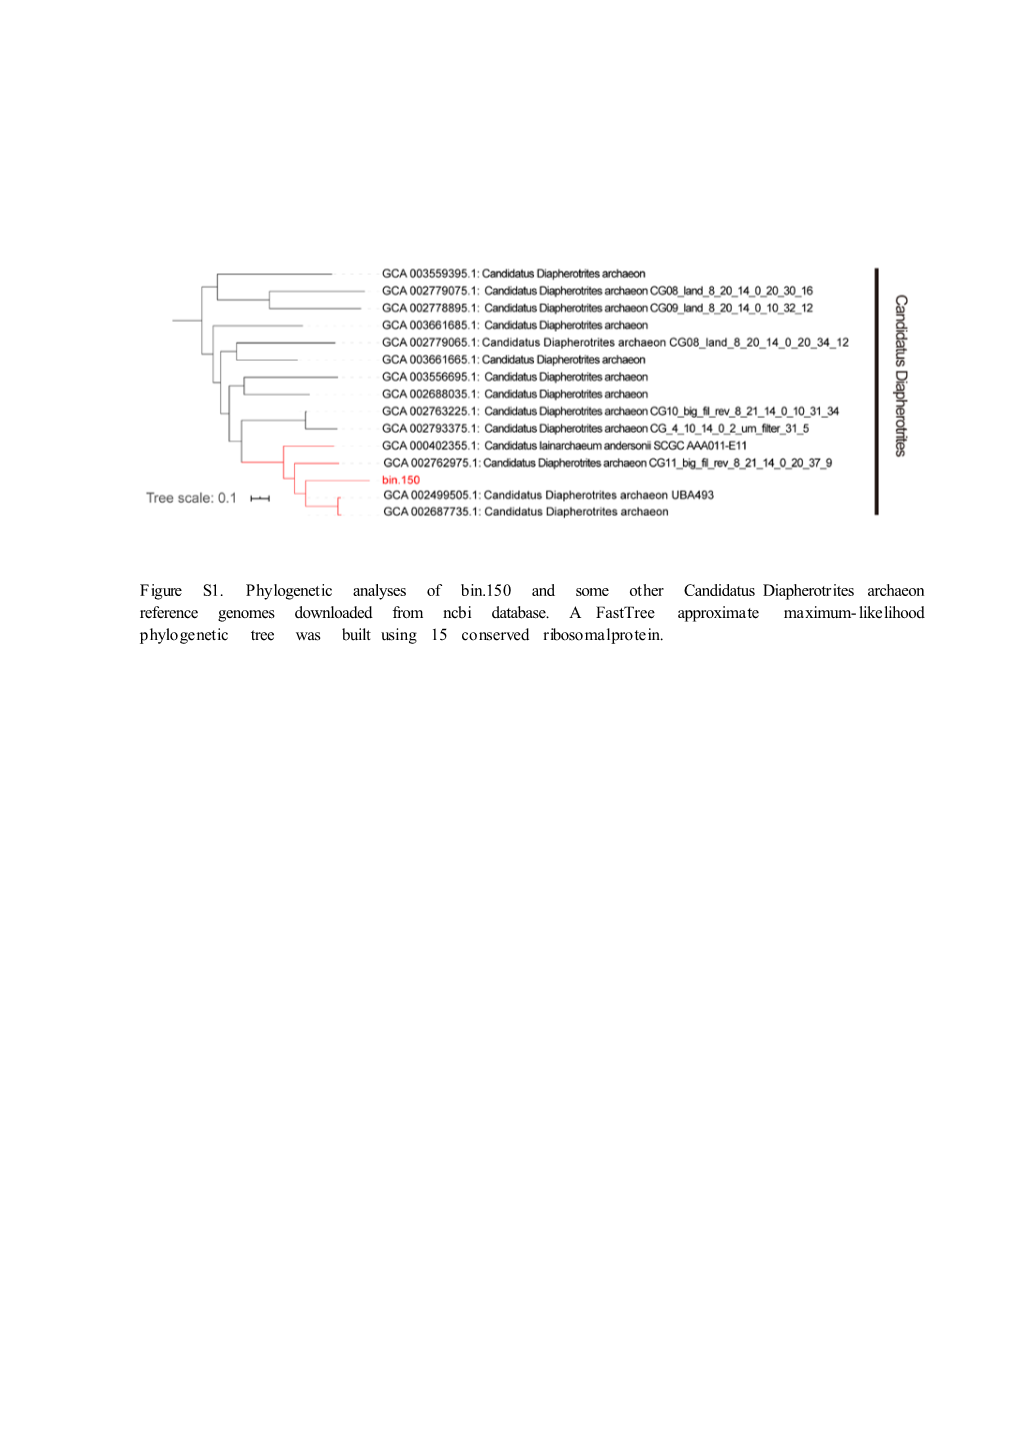 Figure S1. Phylogenetic Analyses of Bin.150 and Some Other Candidatus Diapherotrites Archaeon Reference Genomes Downloaded from Ncbi Database